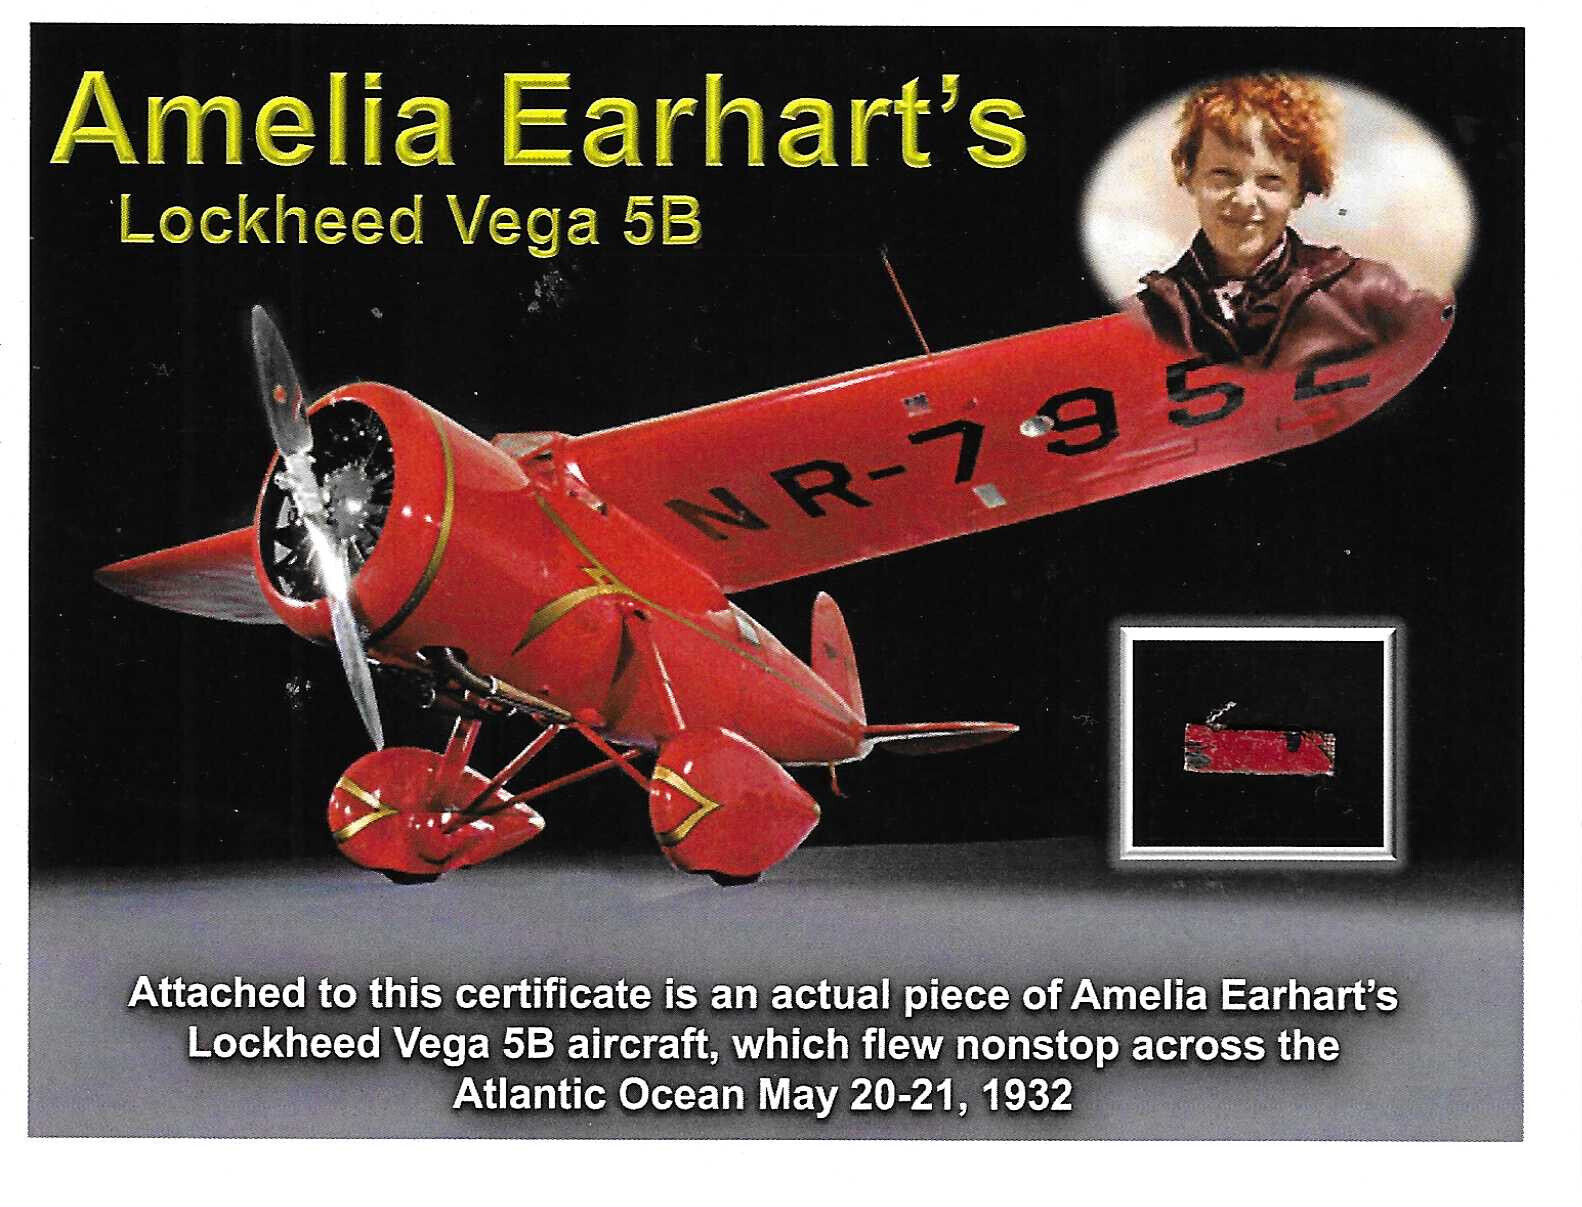 Fragments of the red Fabric From Amelia Earhart's Lockheed Vega 5B Aircraft